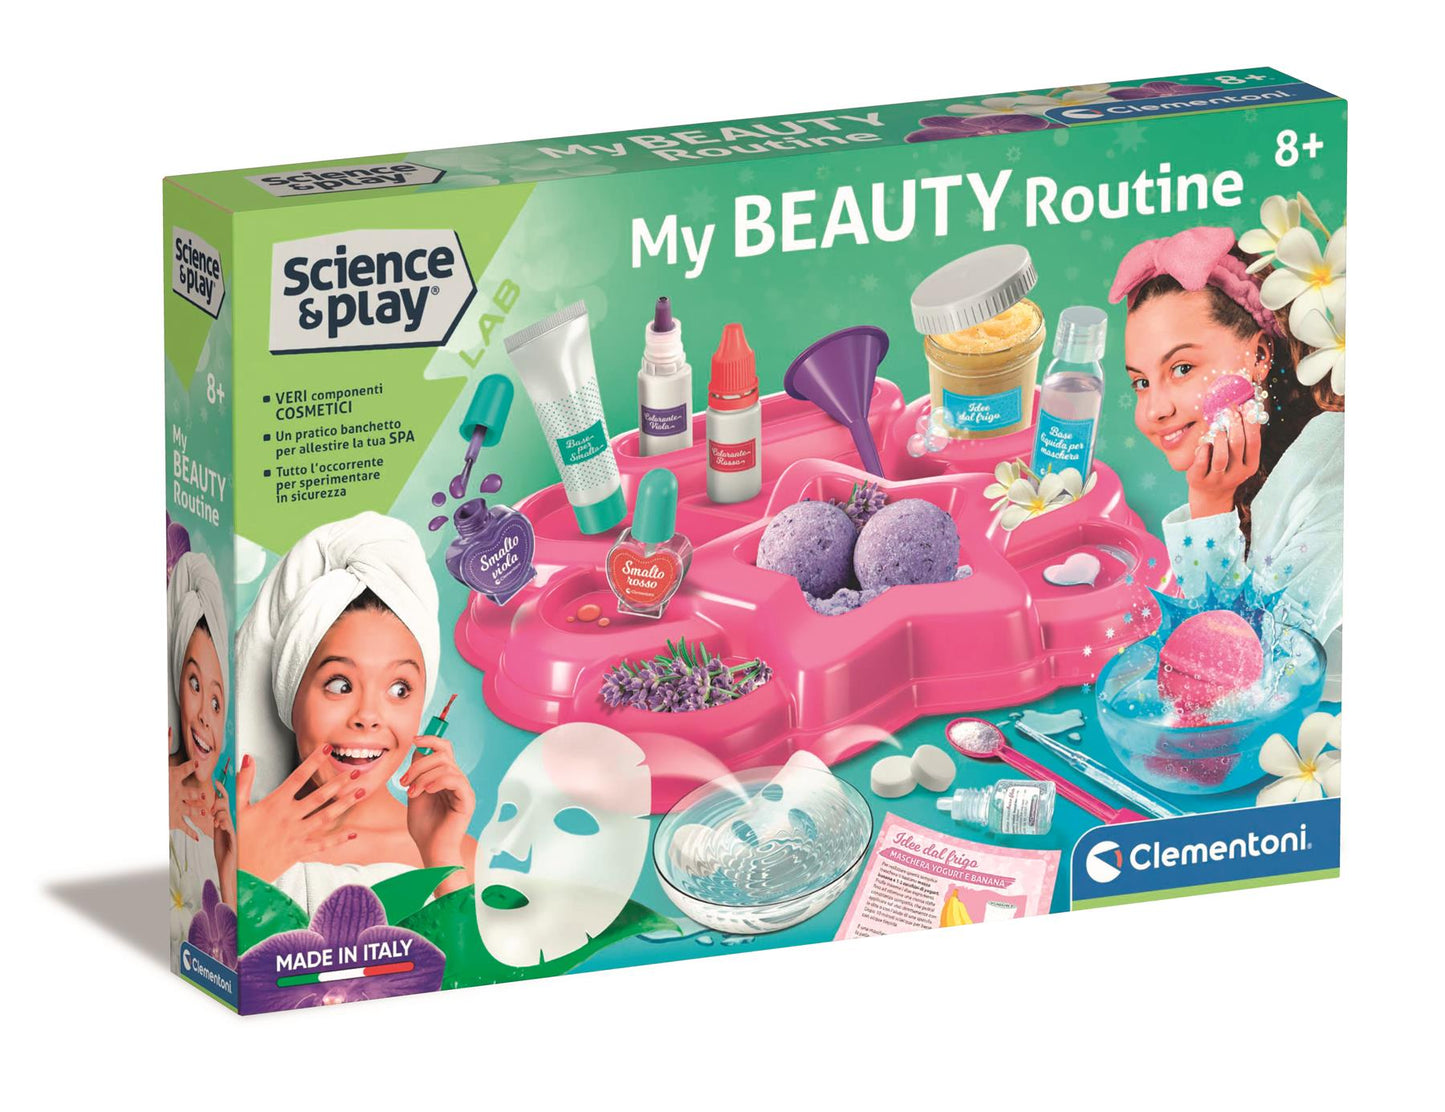 My Beauty Routine Toy Spa Kit